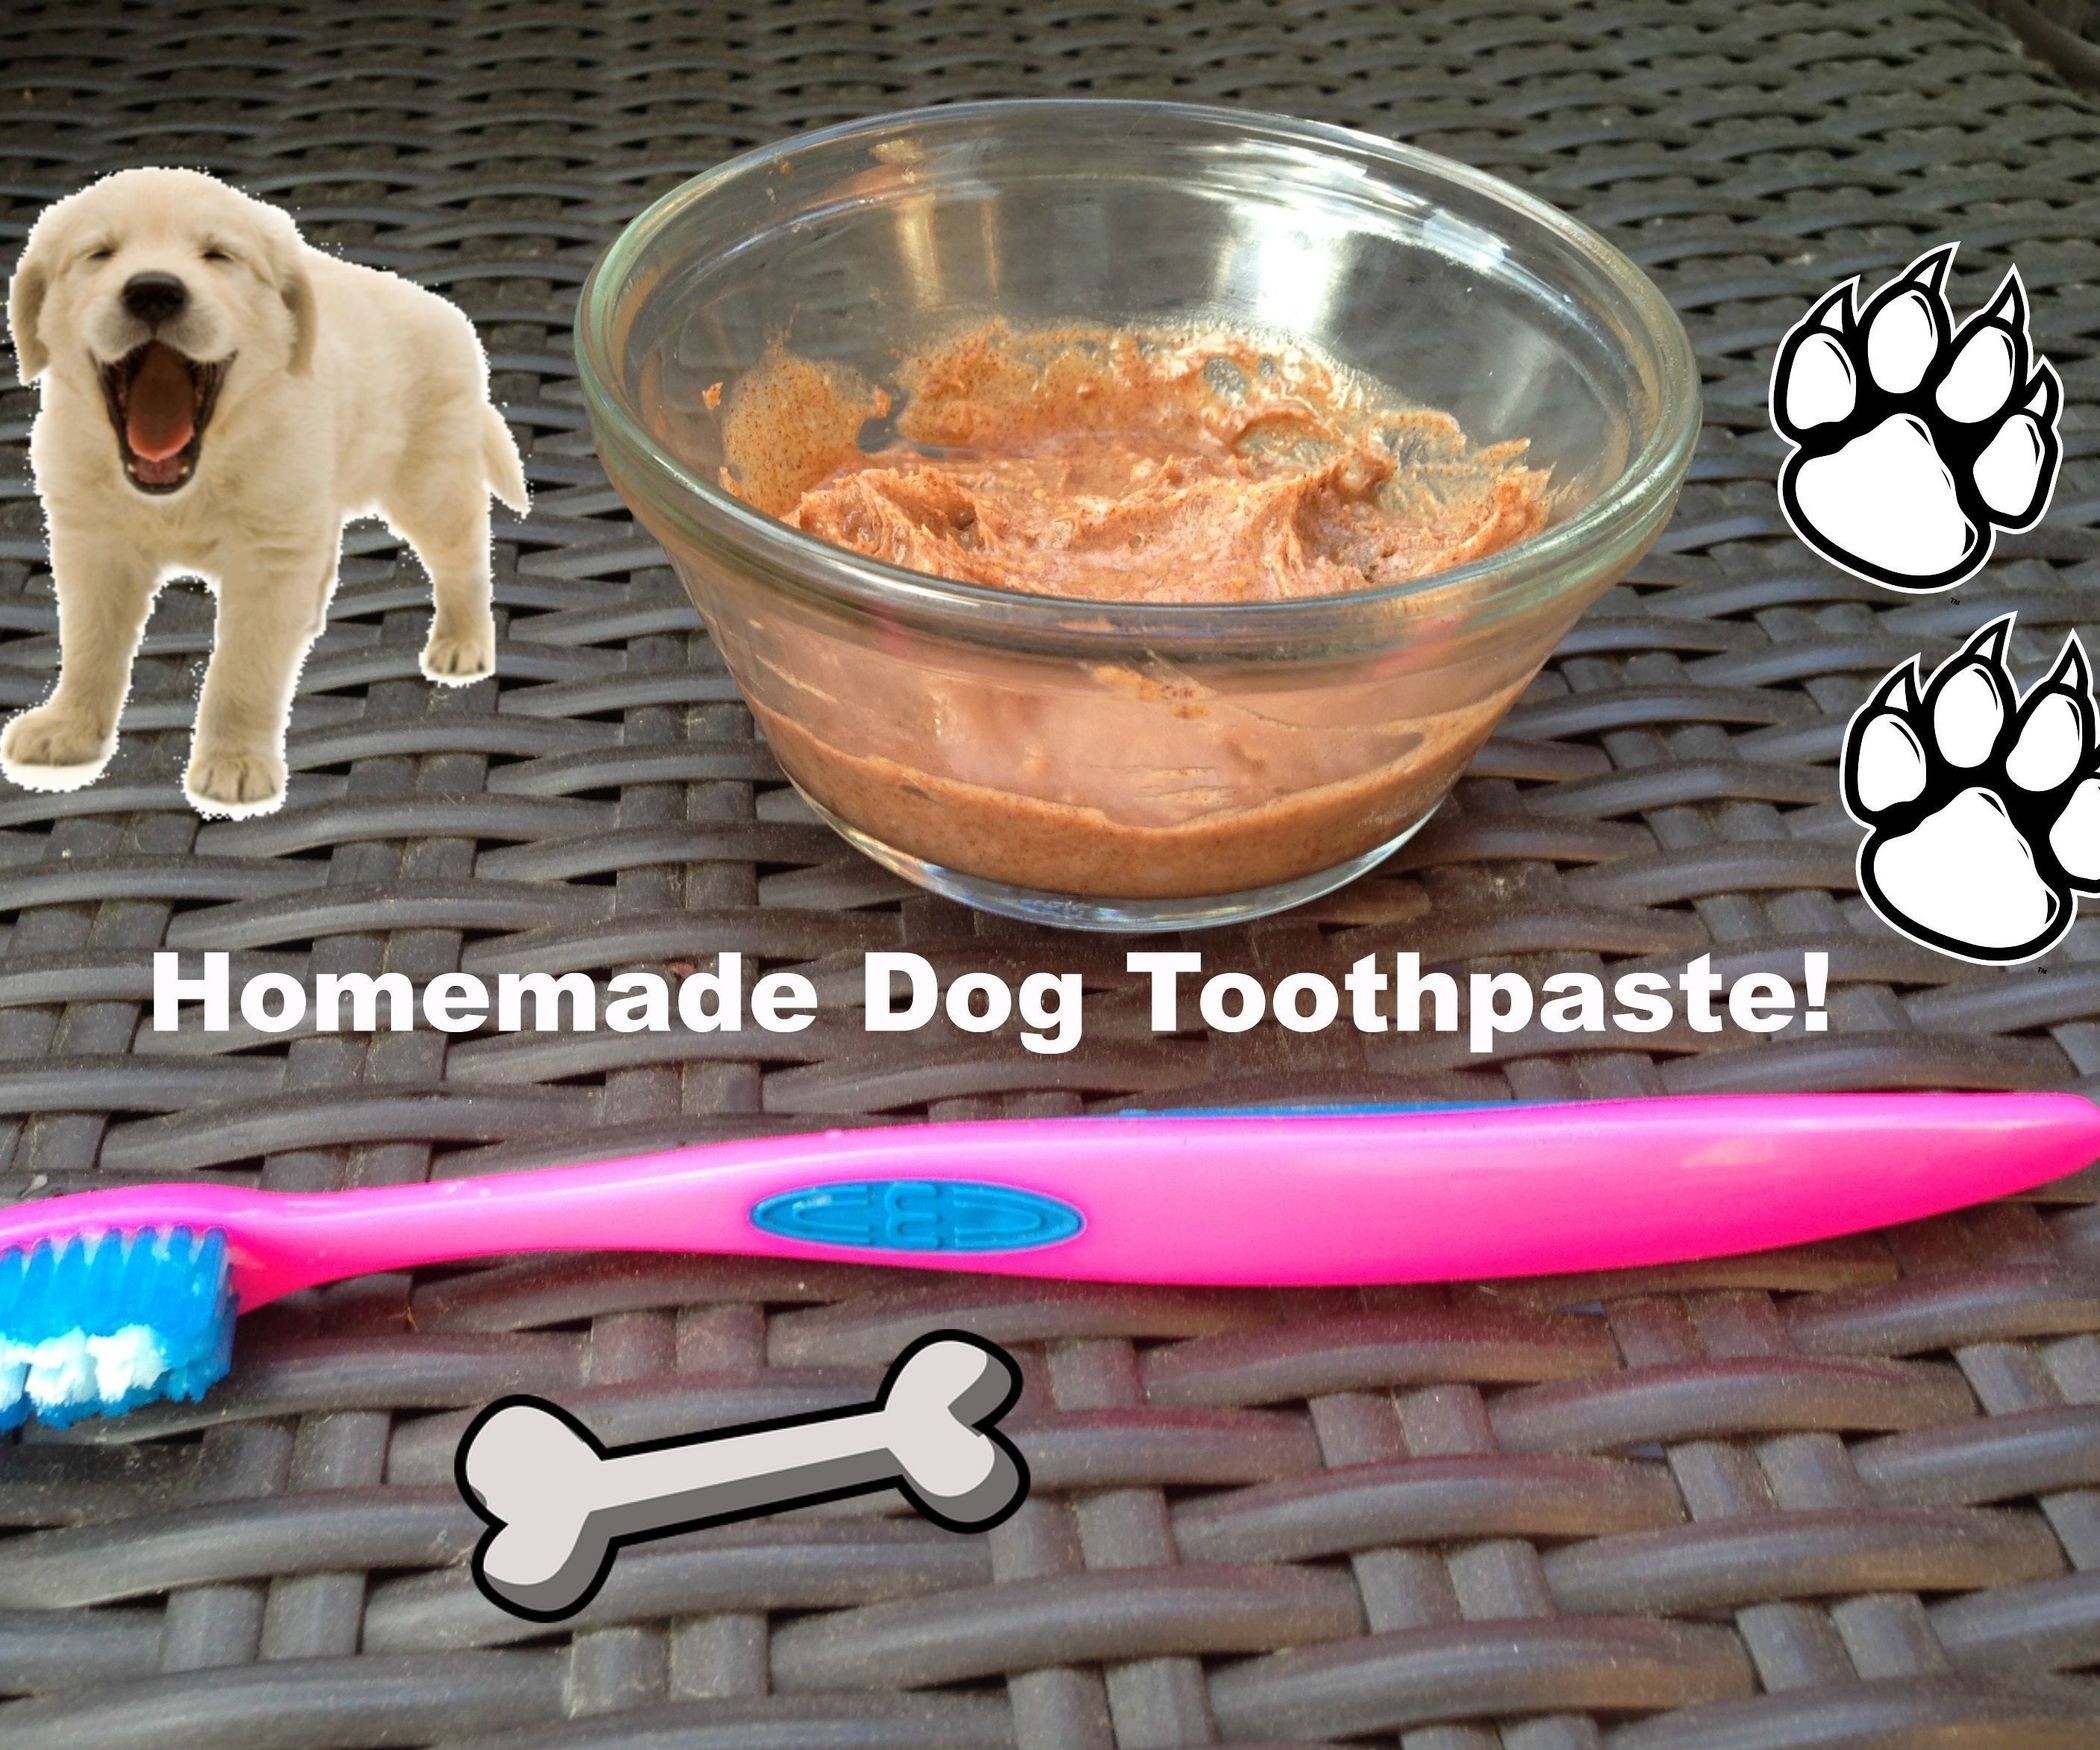 DIY Doggie Toothpaste
 Homemade Toothpaste for Dogs 2